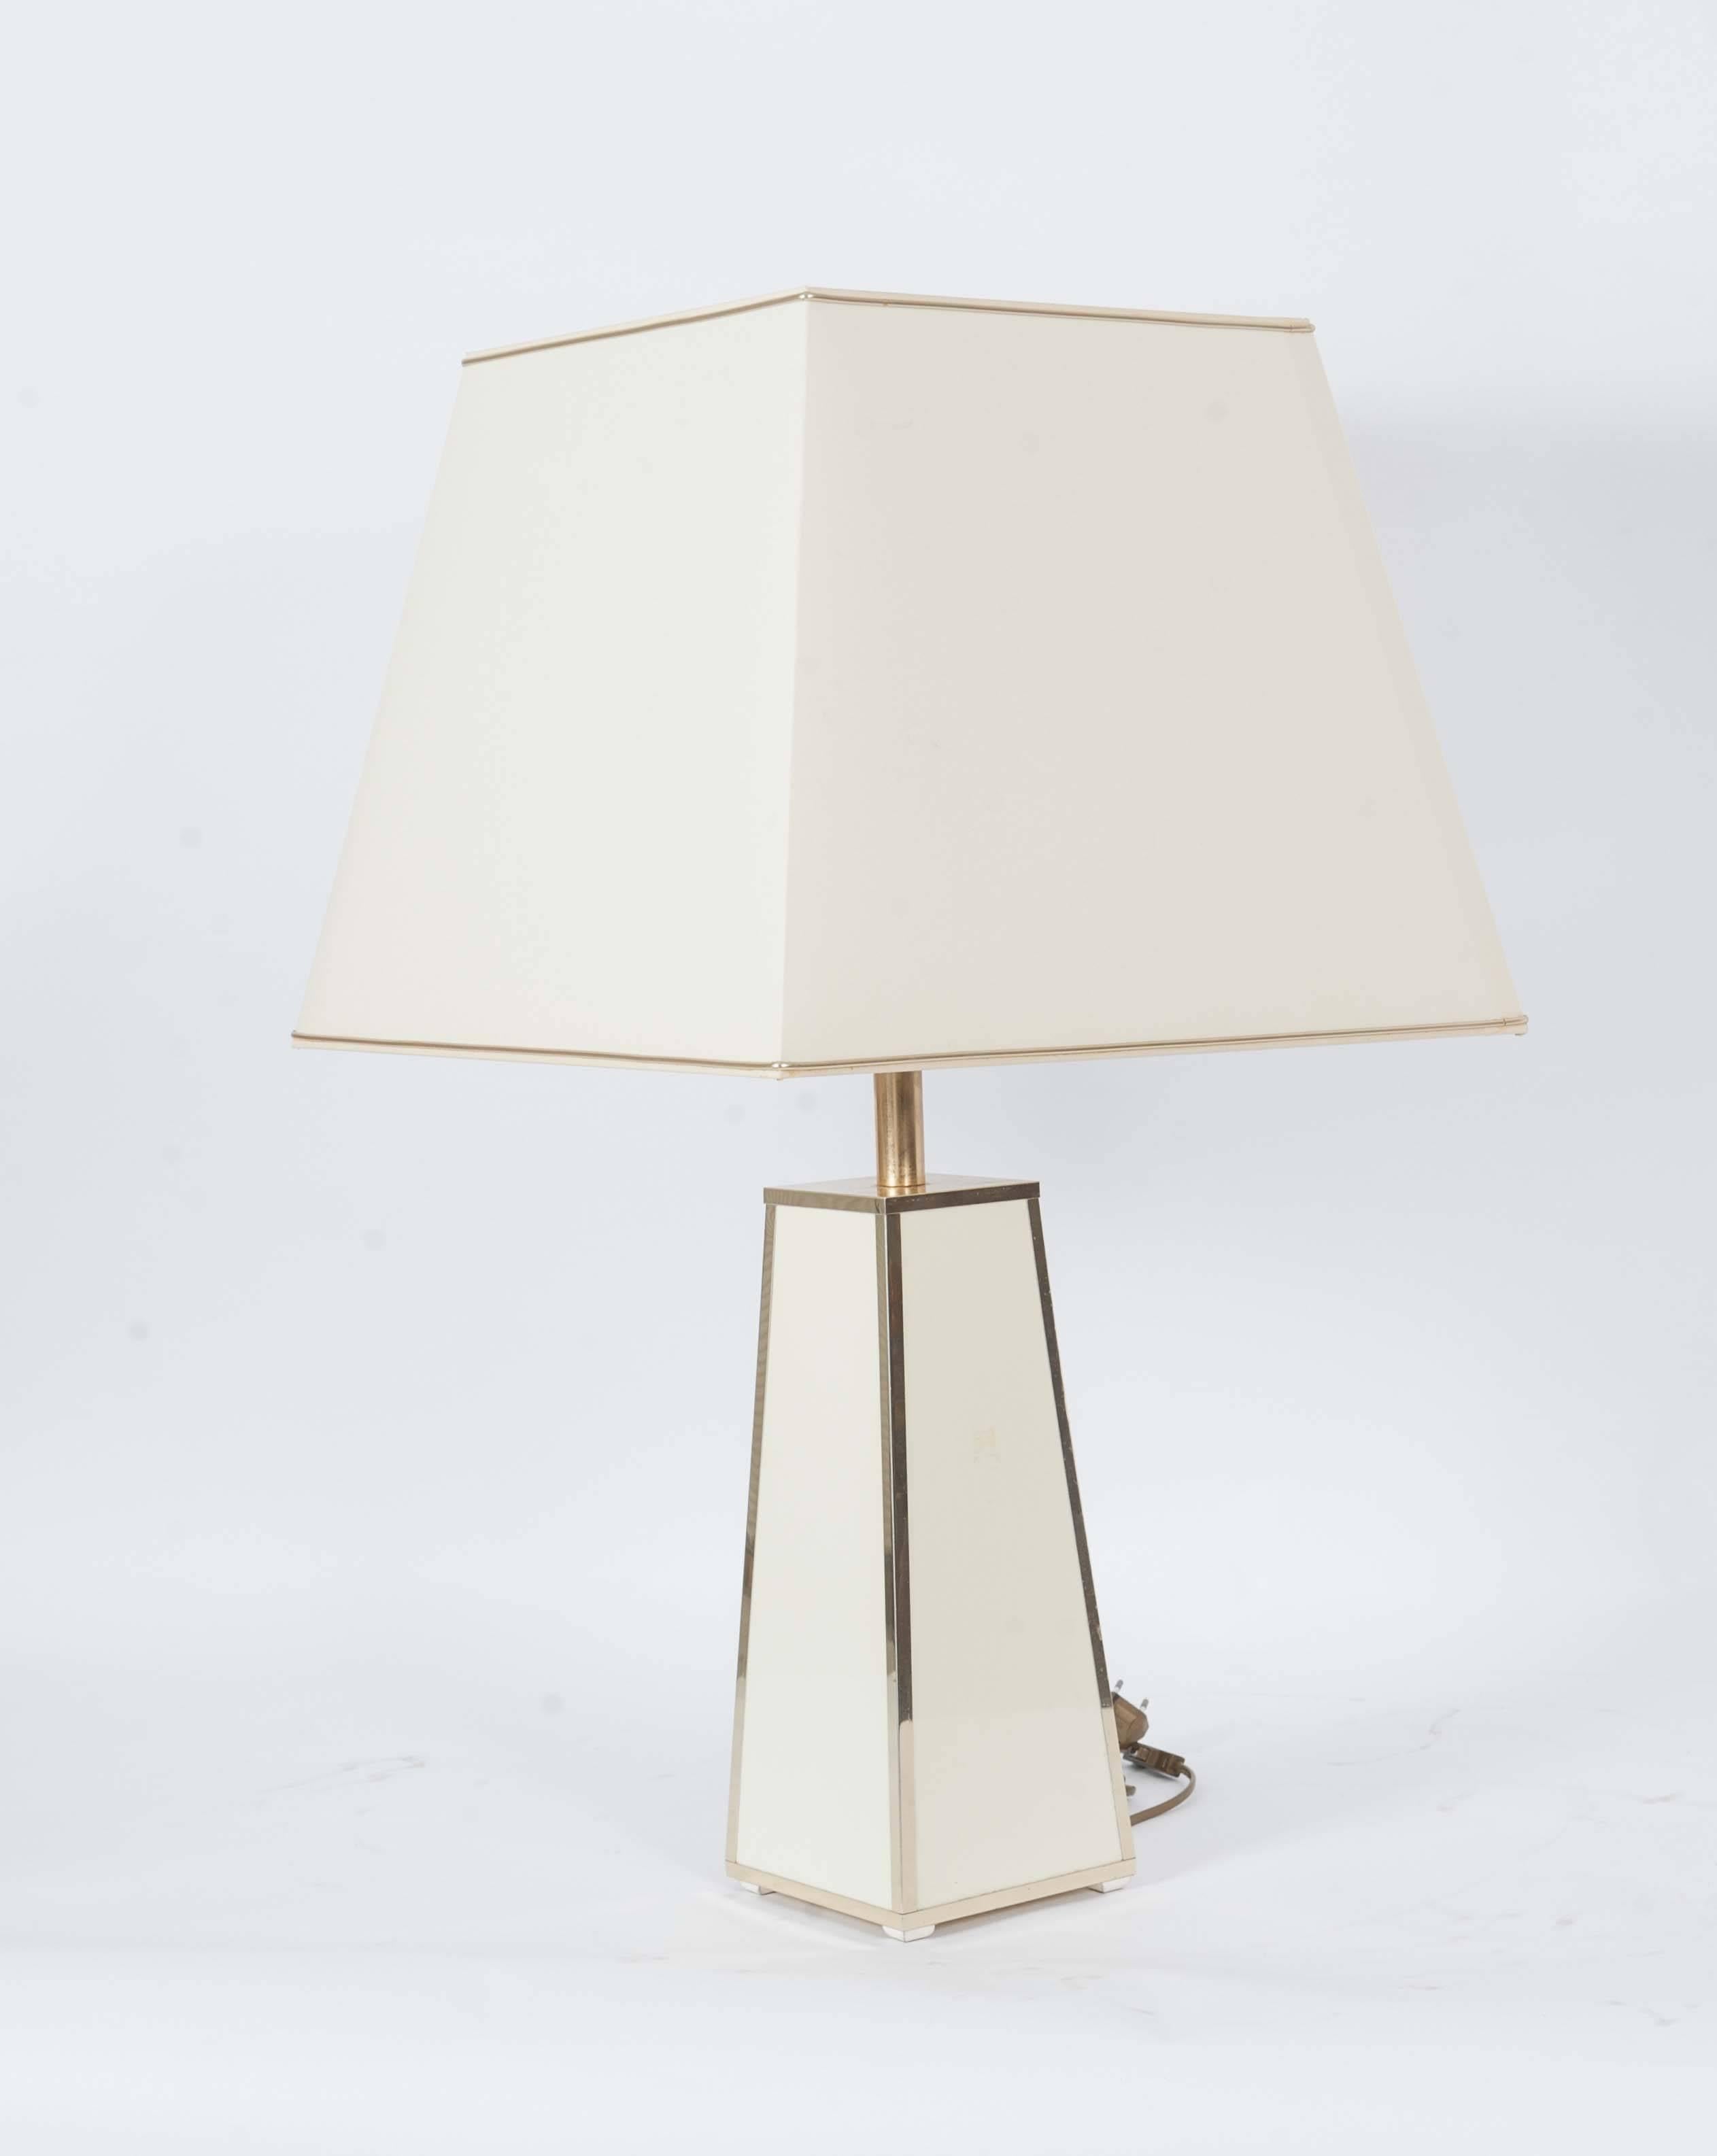 This rather large table lamp radiates a chic club atmosphere. Its square pillared foot has golden corners and creme colored planes. 
The shade is also square tapered which ensures the warm lighting. 

The measurements of the shade are:
Height 36